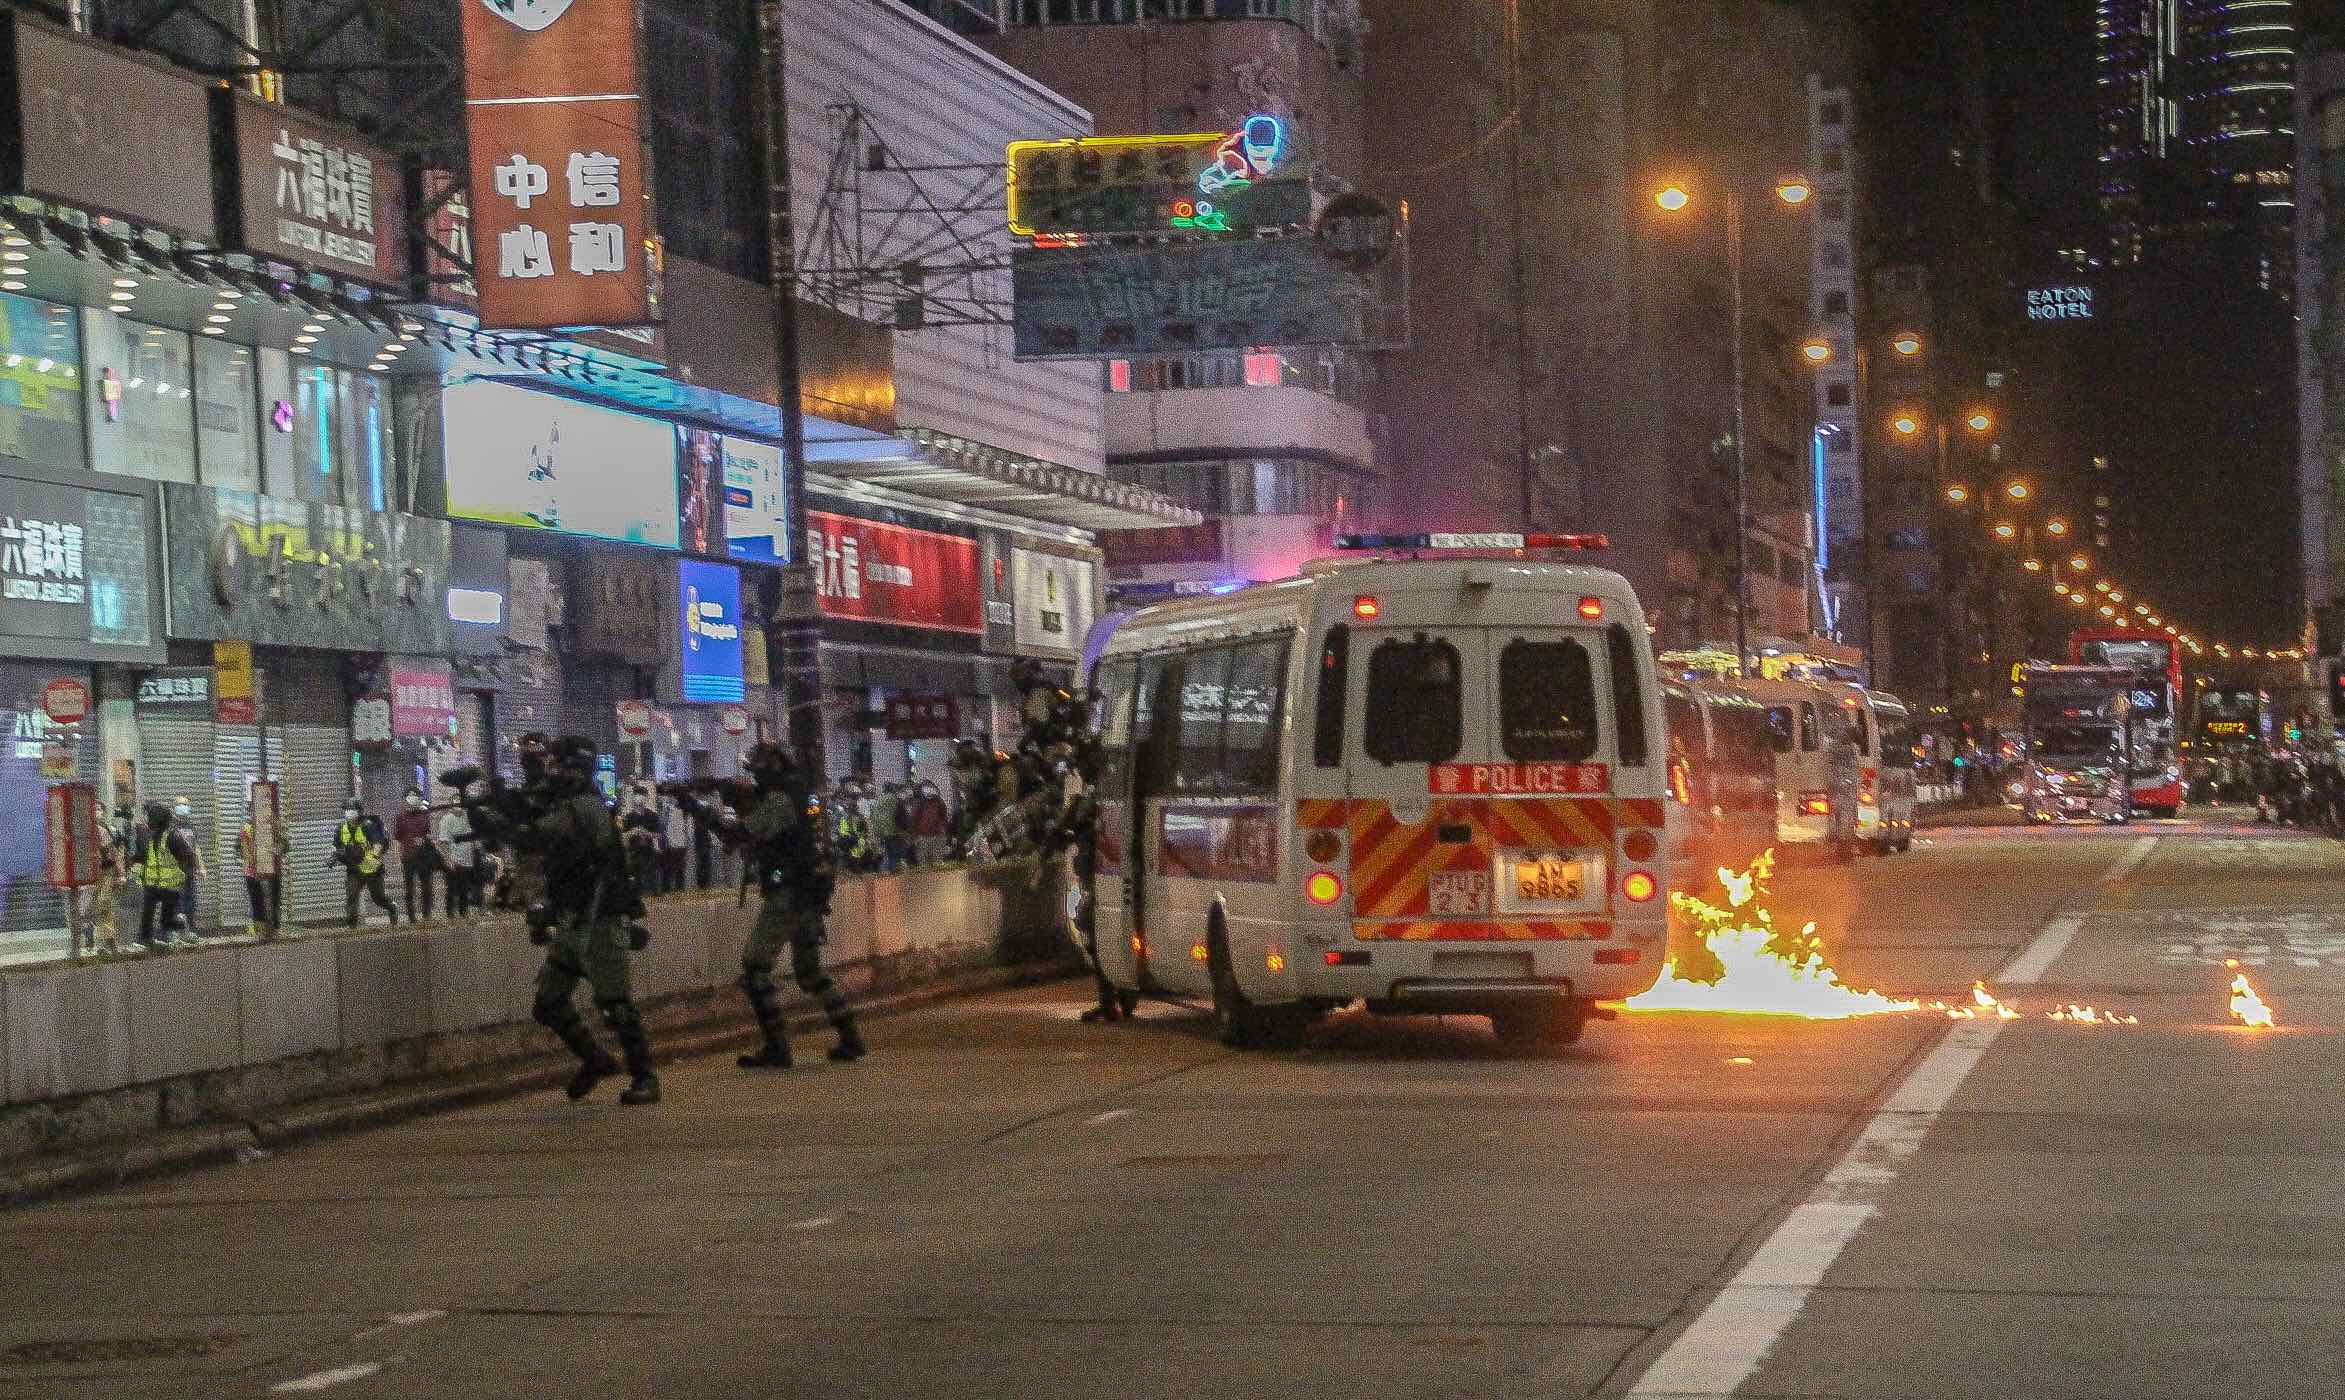 A fire burns near a police van during protests in Mong Kok on Feb. 29, 2020. Photo: Tommy Walker